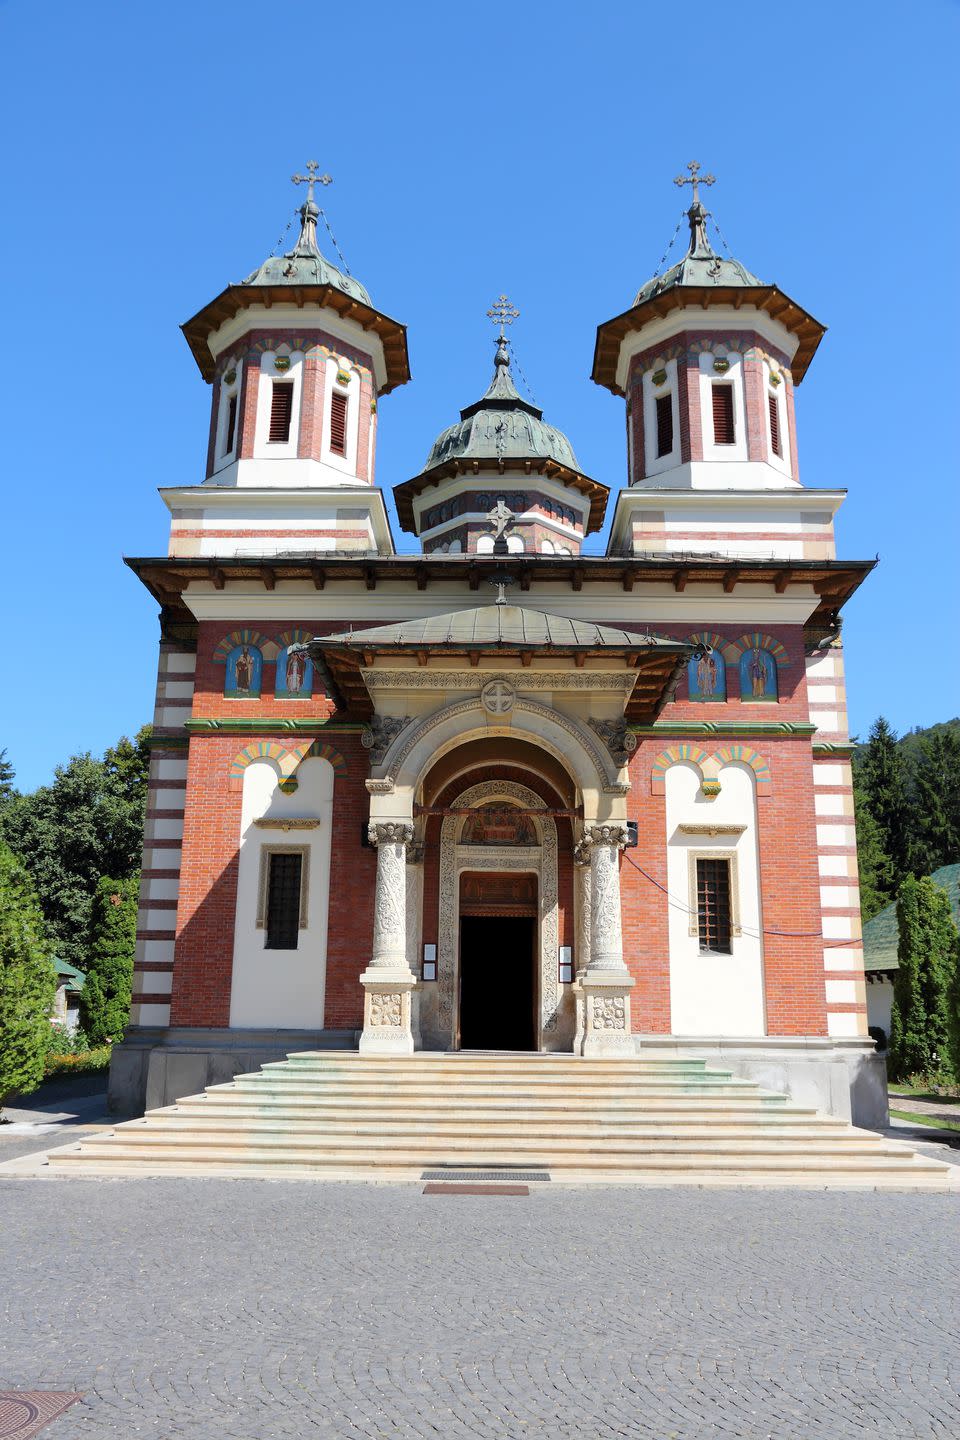 Nearby is the 300-year-old Sinaia Monastery.